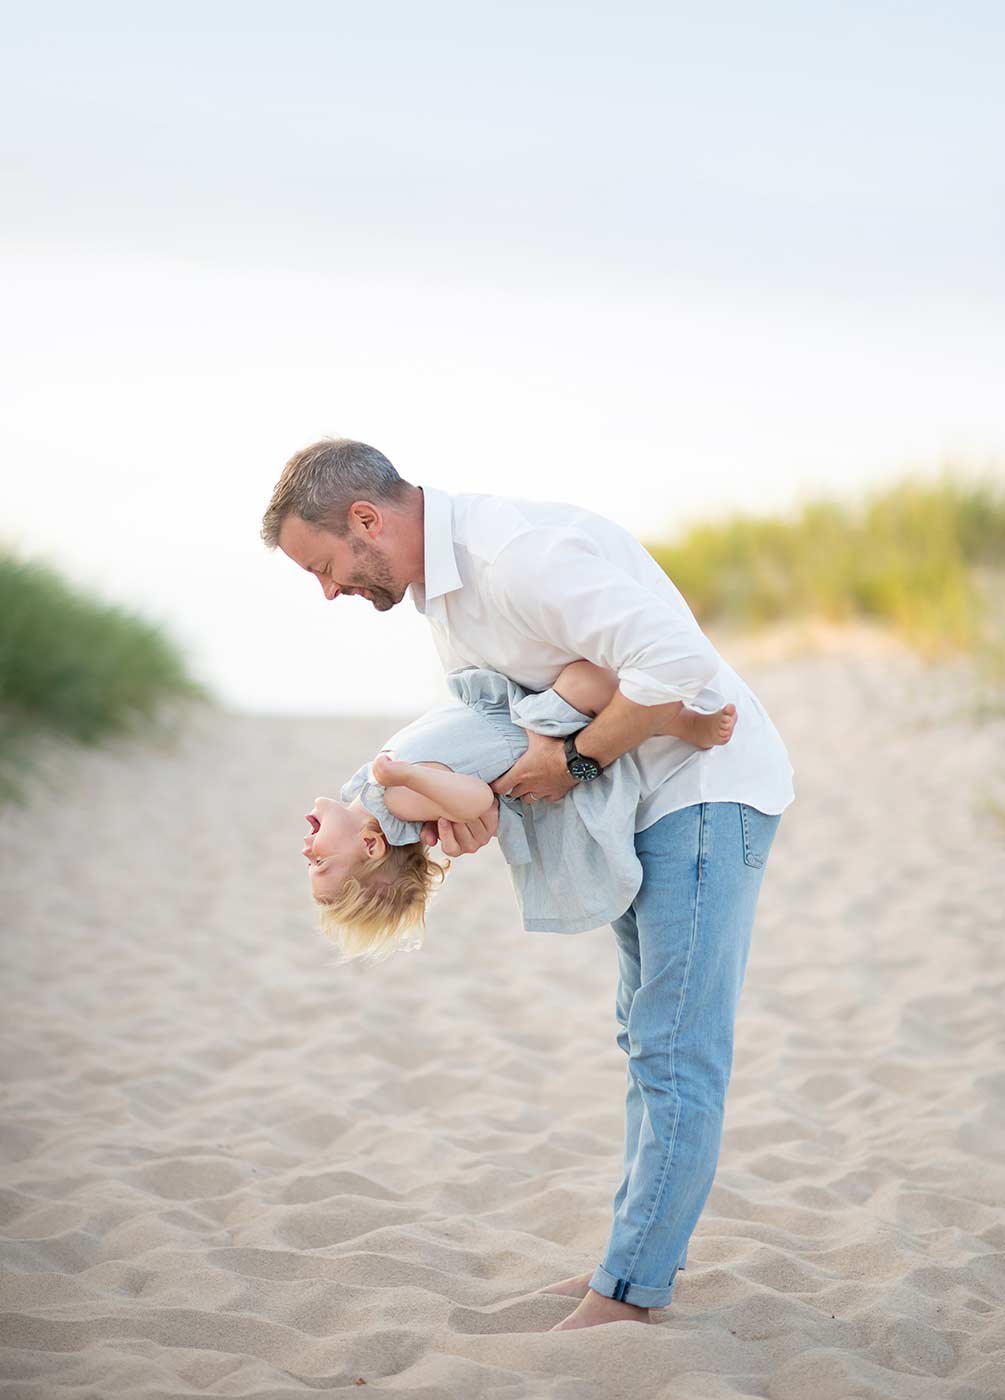 Father sharing a playful moment with his daughter on a beach near Westhampton, NY